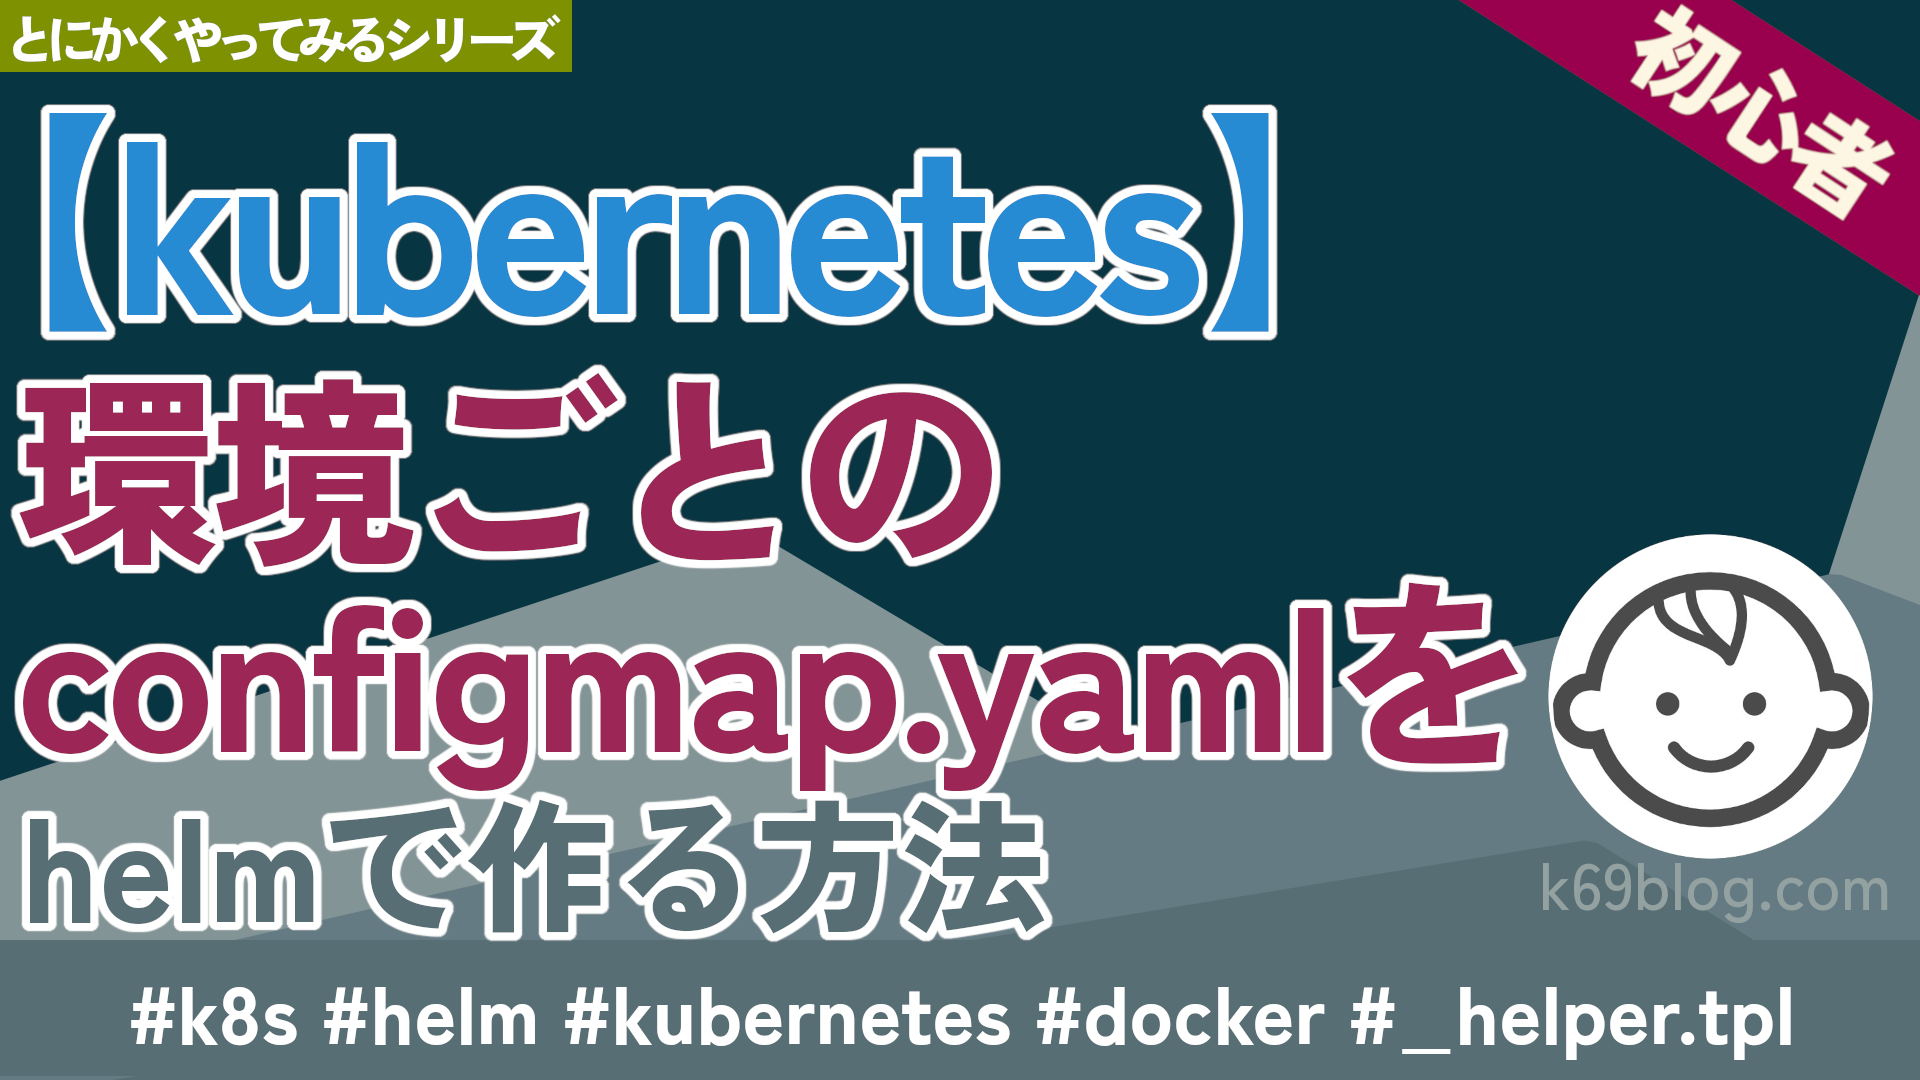 Cover Image for 【kubernetes】環境ごとのconfigmap.yamlをhelmで作る方法